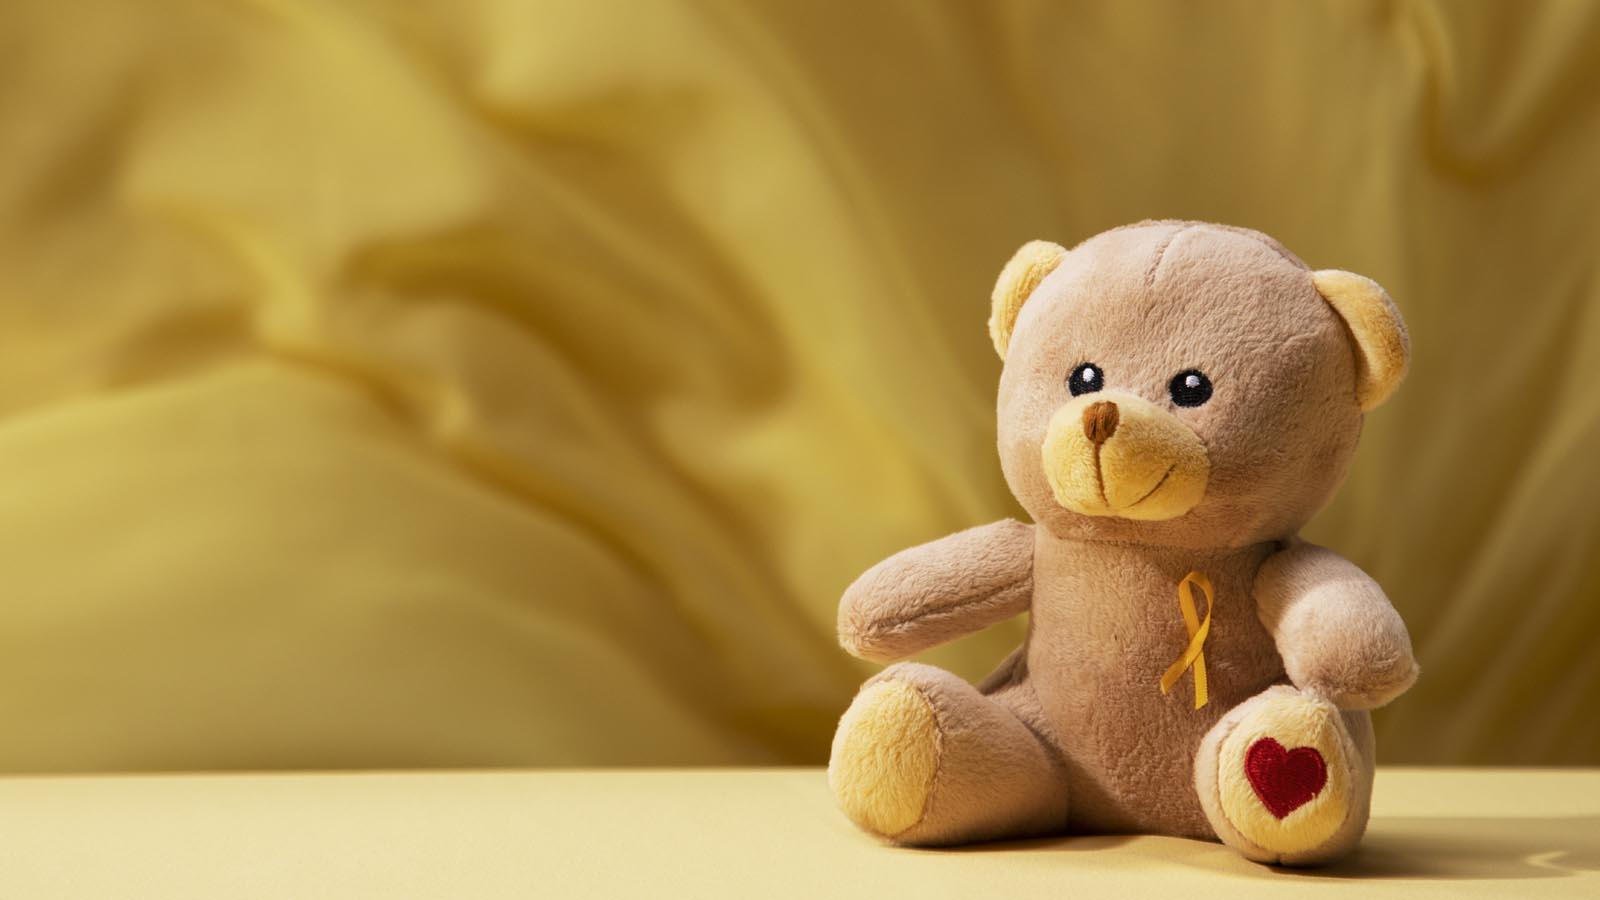 Happy Teddy Bear Day Messages Quotes Wishes Image